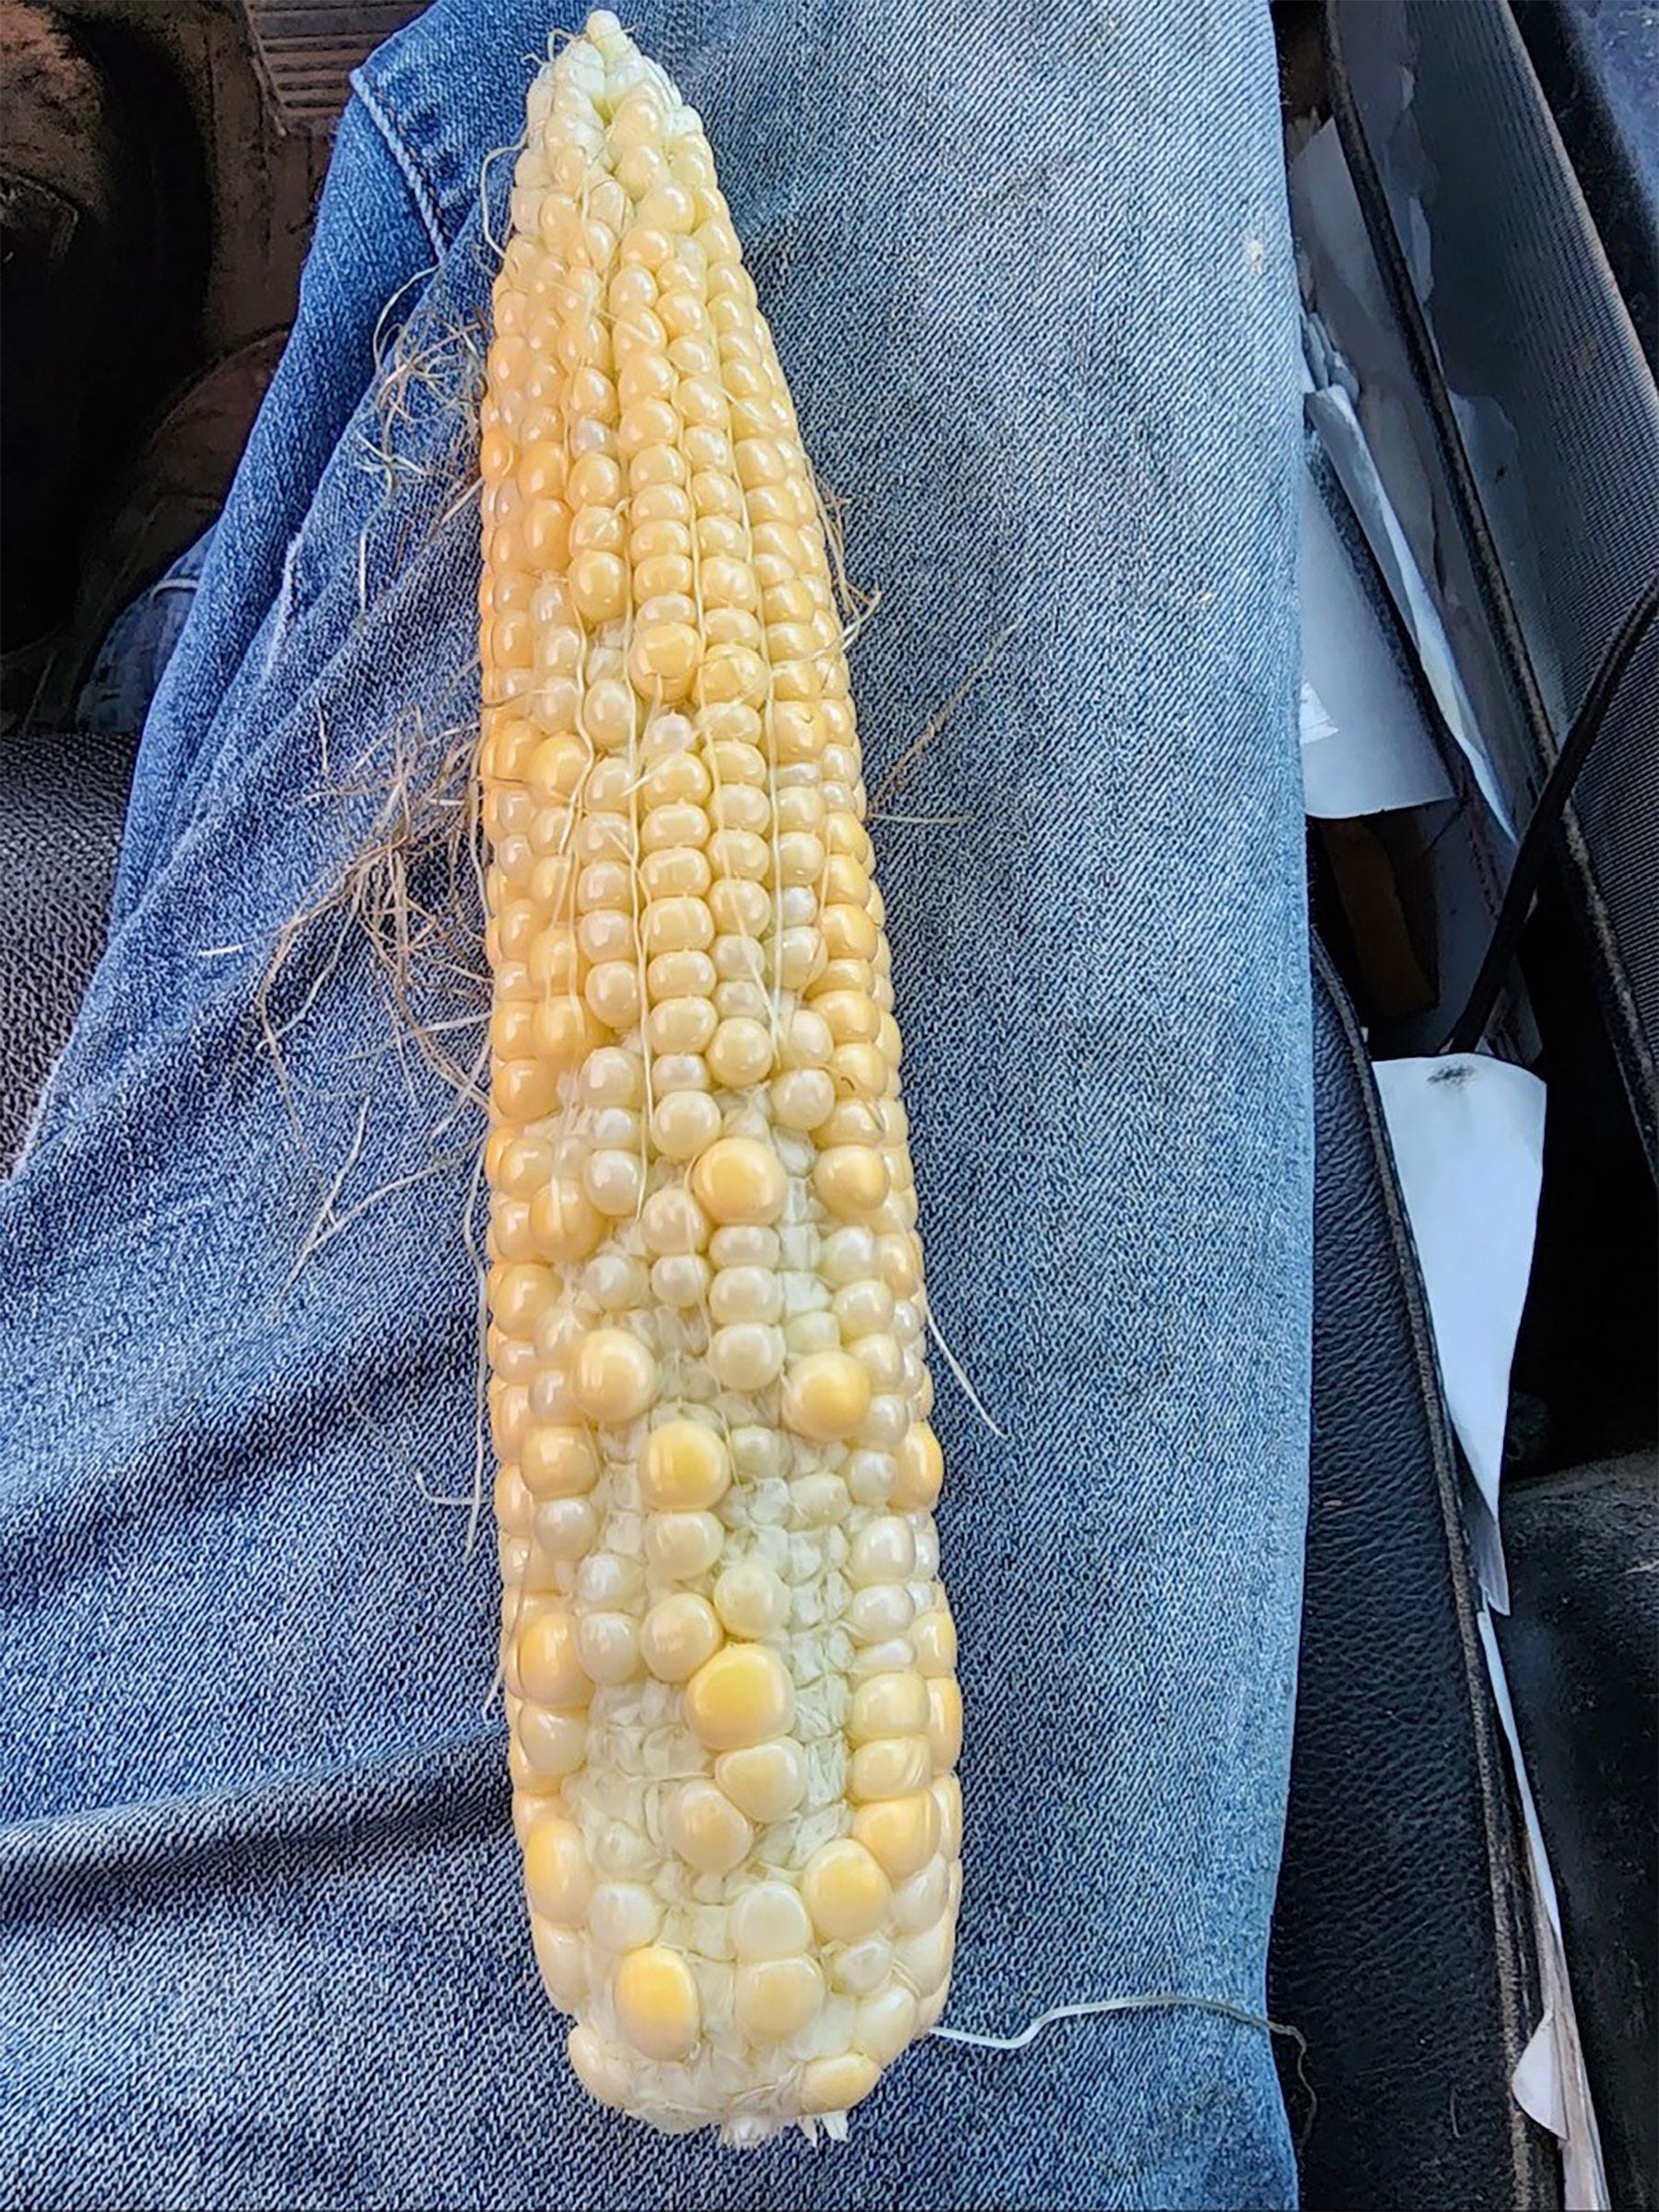 shucked ear of corn with missing kernels at the base